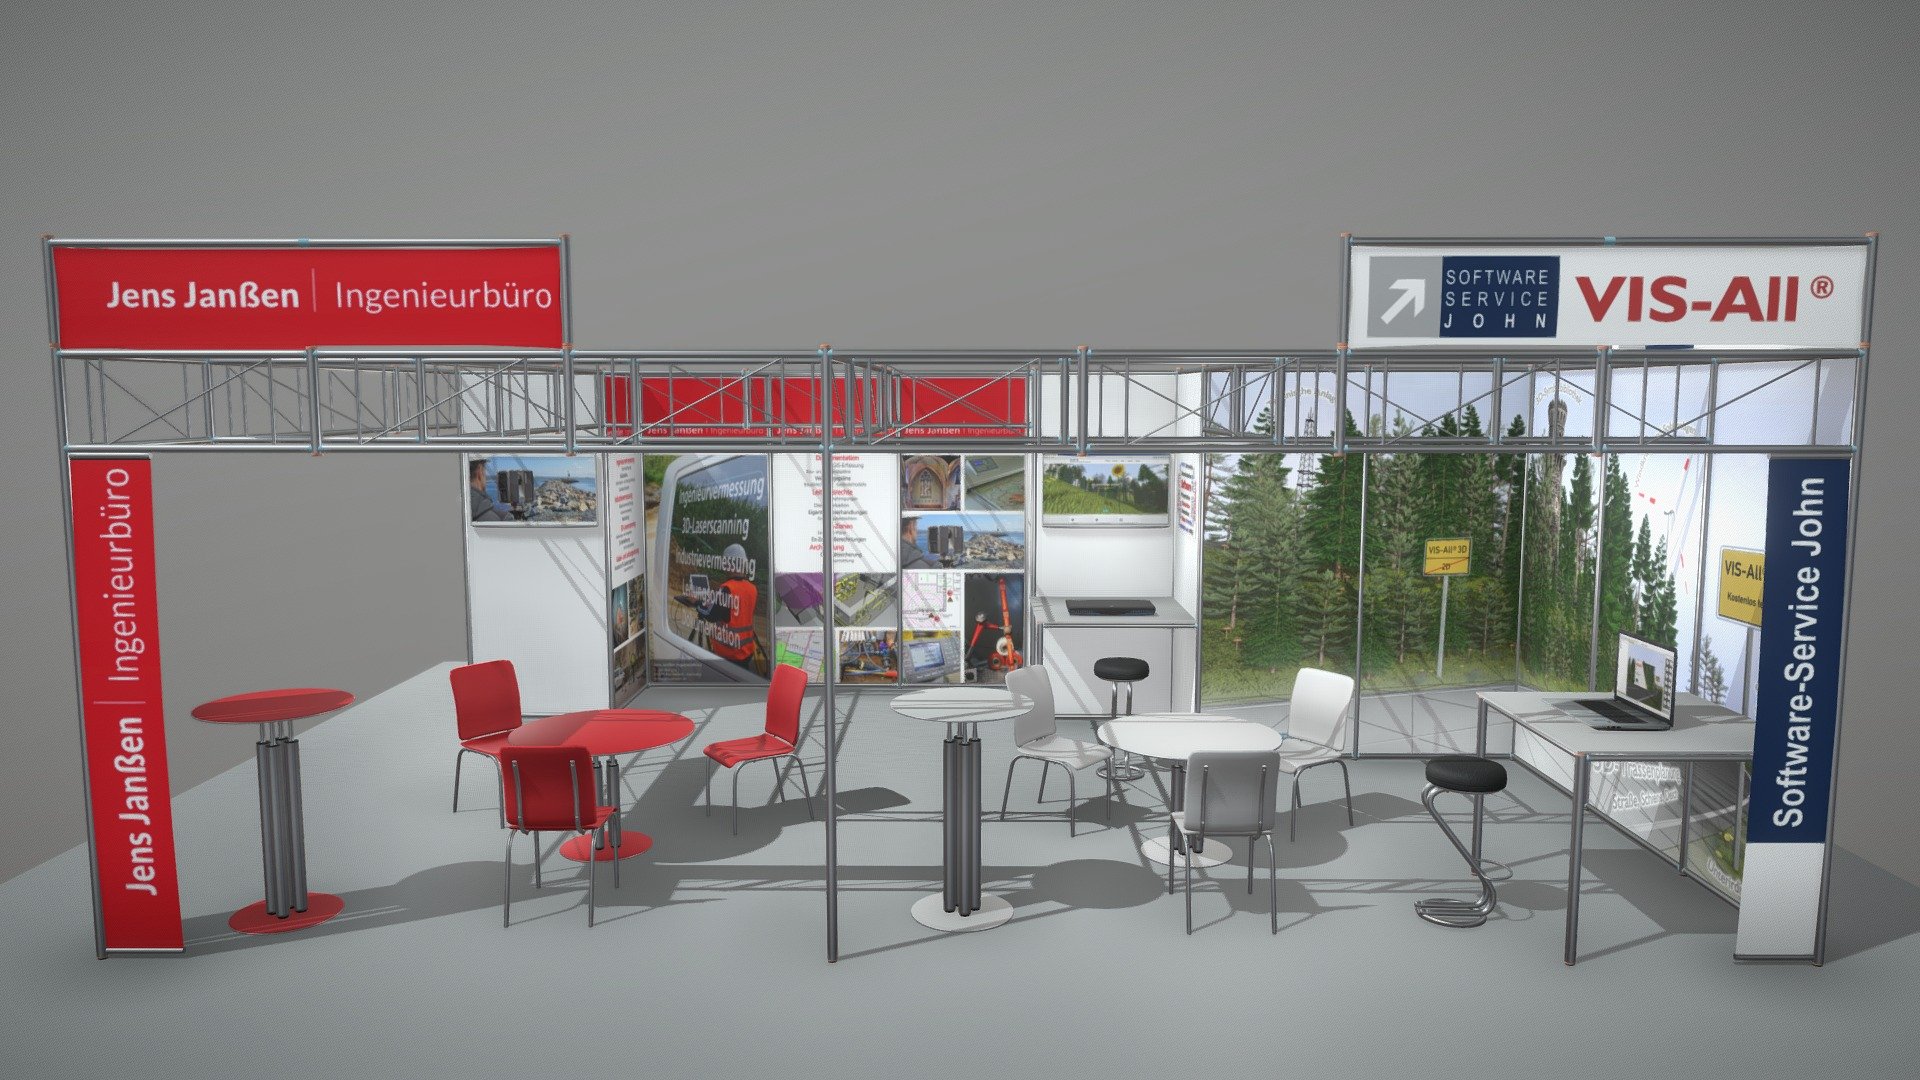 Planung Intergeo Messestand 2018 (Version 1) - Planung Intergeo Messestand 2018 (Version 1) - 3D model by VIS-All-3D (@VIS-All) 3d model